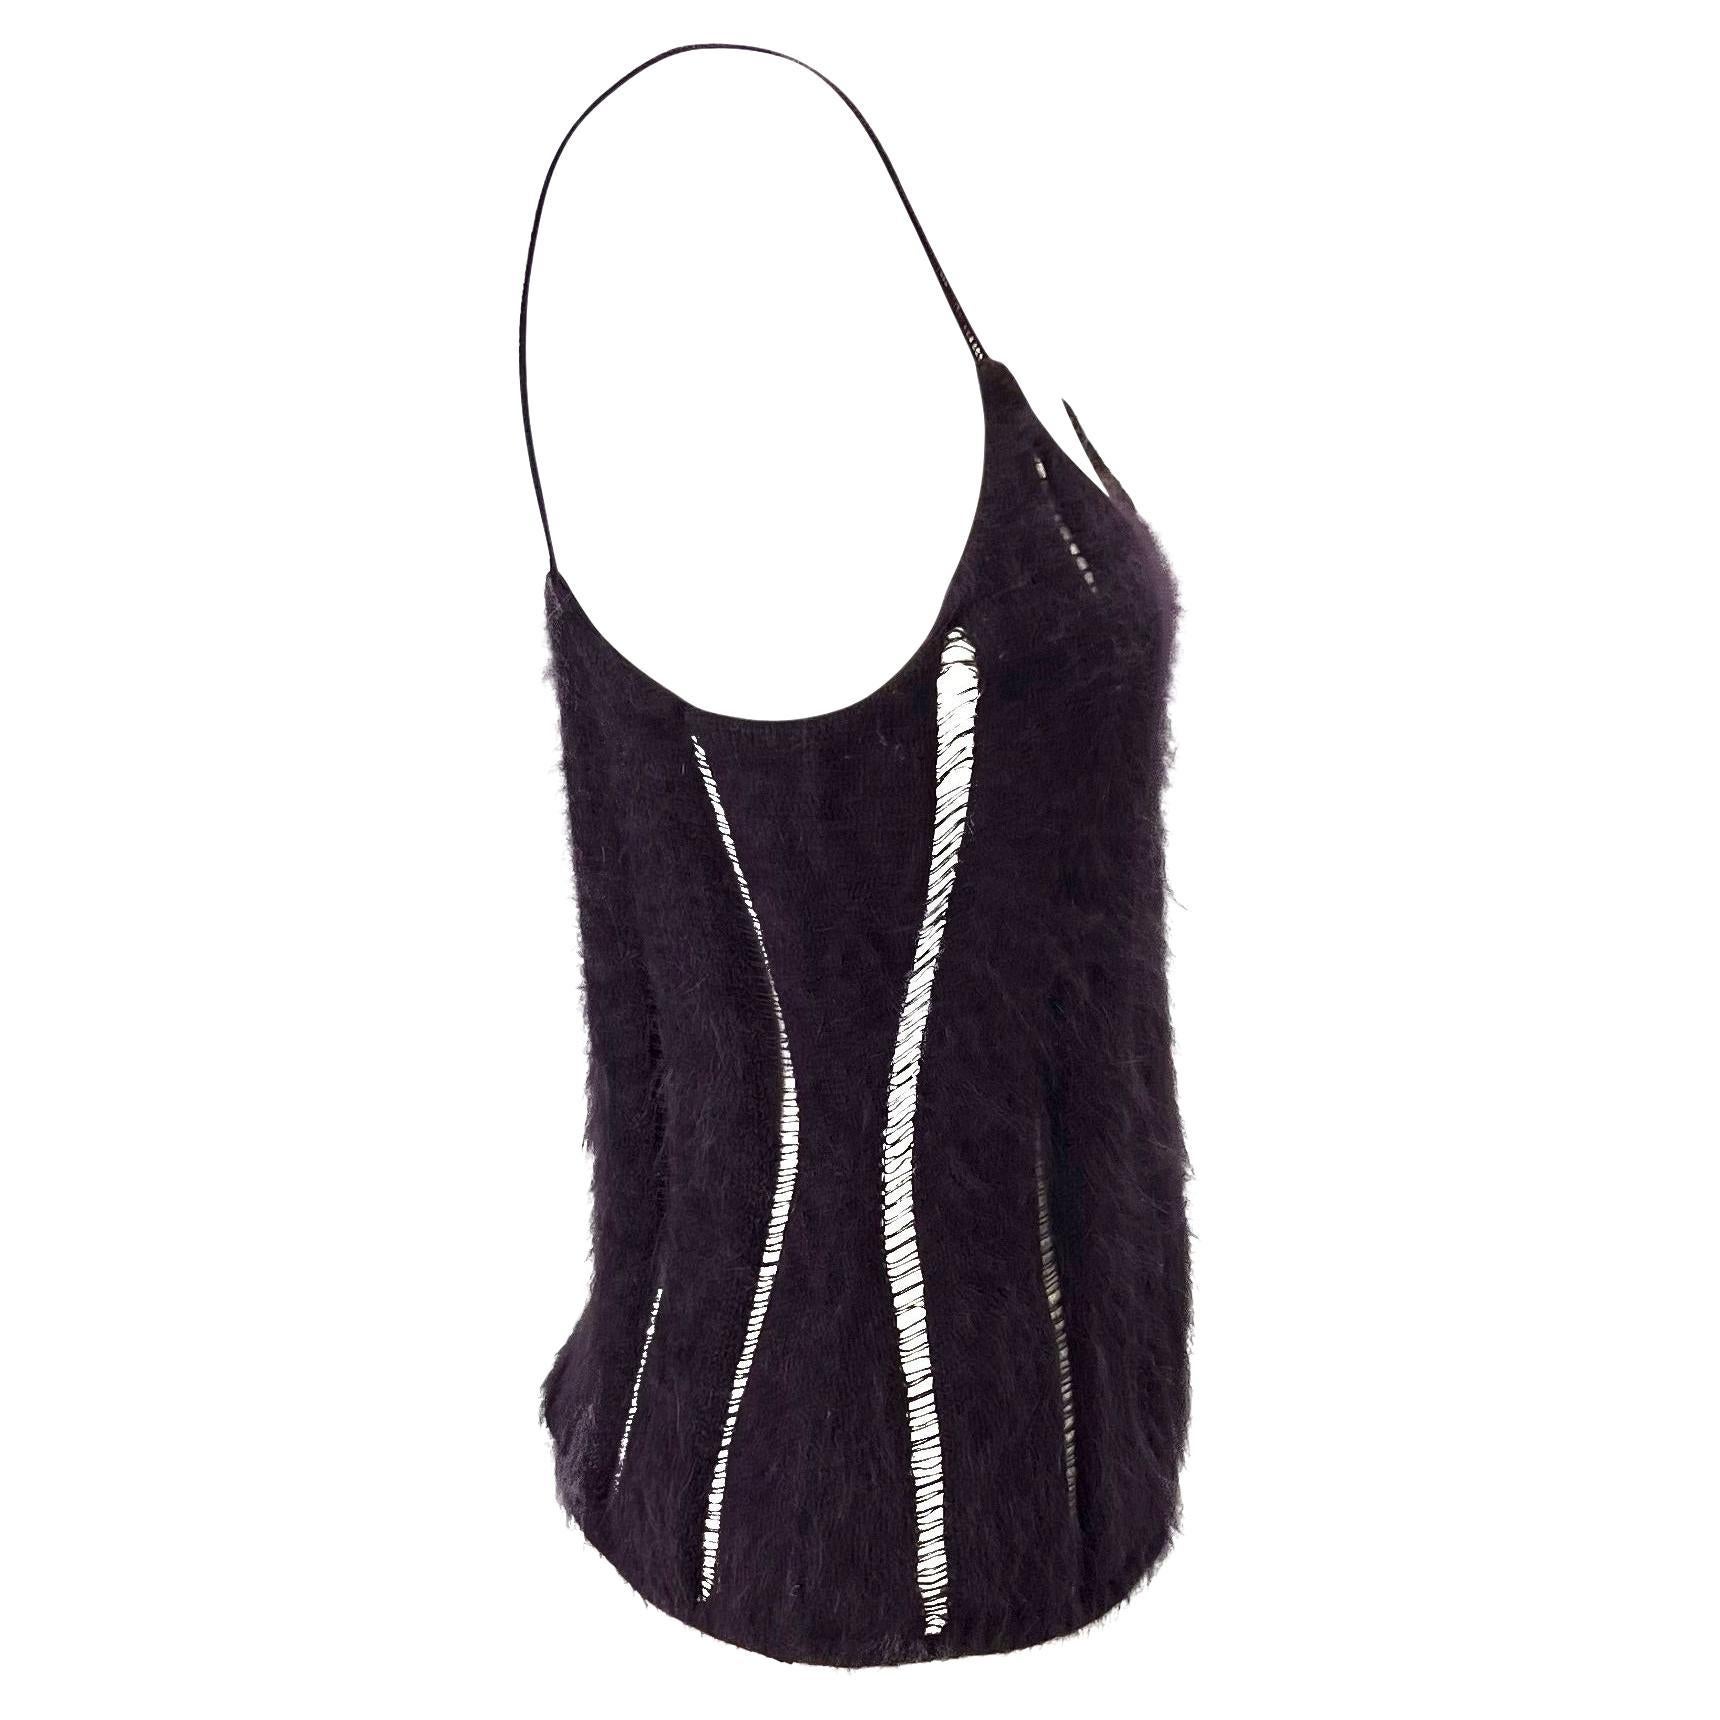 F/W 2001 Yves Saint Laurent by Tom Ford Purple Angora Stretch Panel Tank Top In Good Condition For Sale In West Hollywood, CA